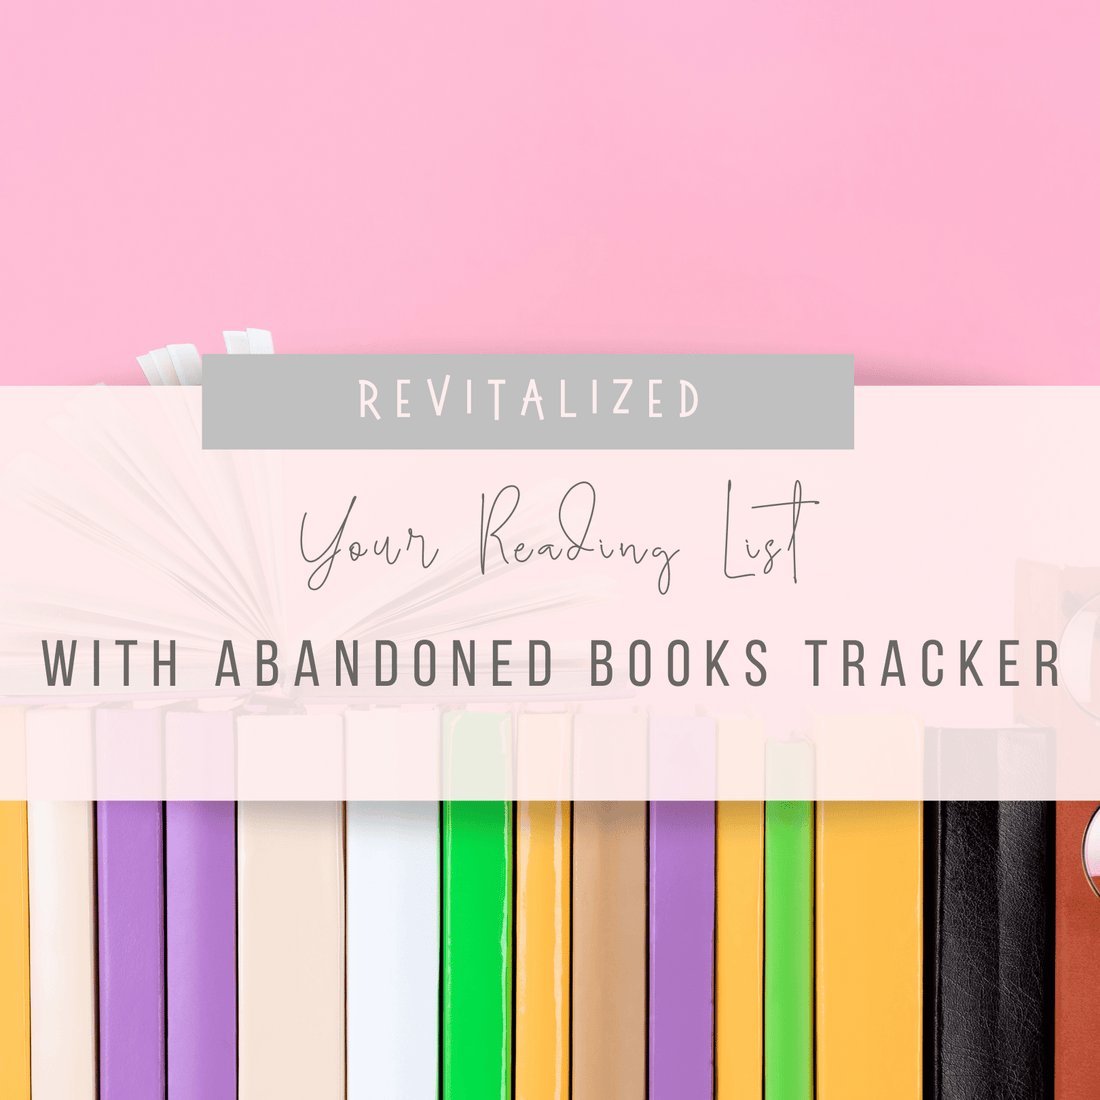 Revitalized your reading list with abandoned book tracker